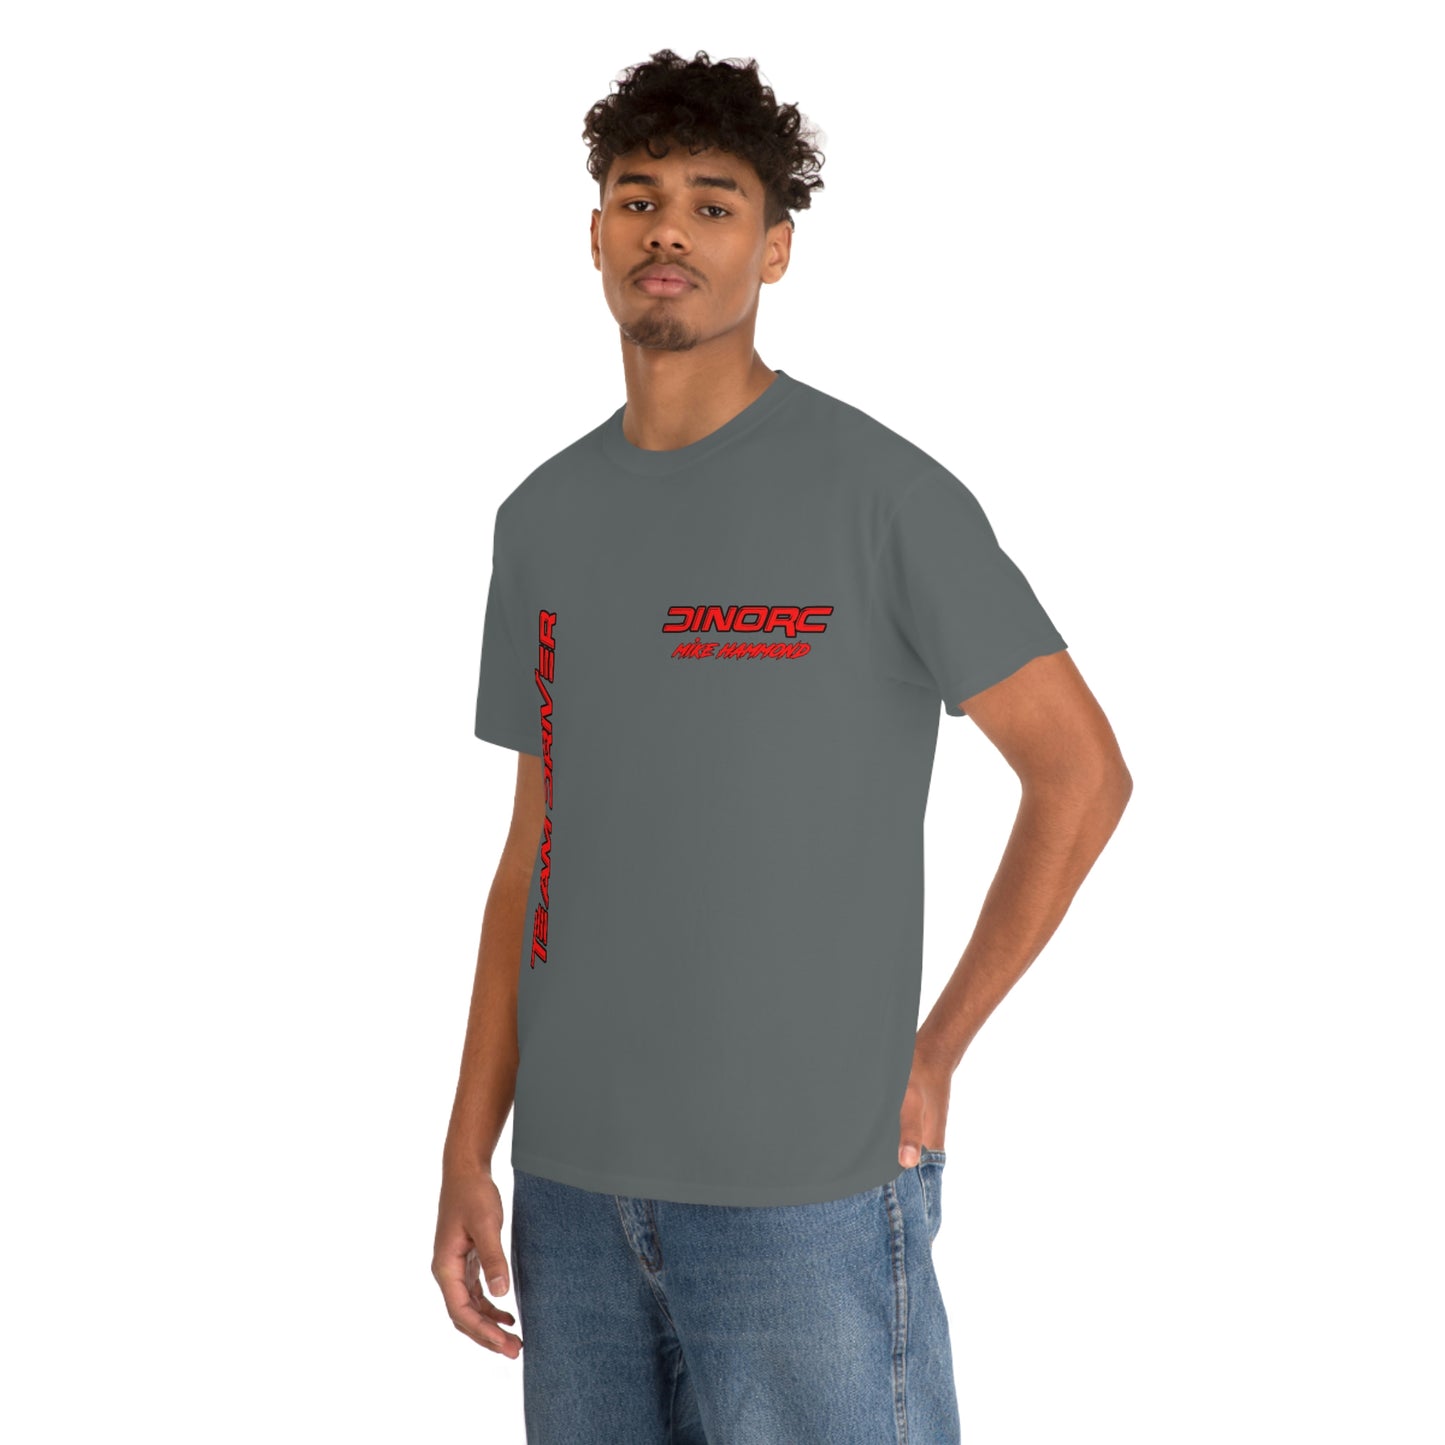 Vertical Team Driver Mike Hammond Front and Back DinoRc Logo T-Shirt S-5x 5 colors